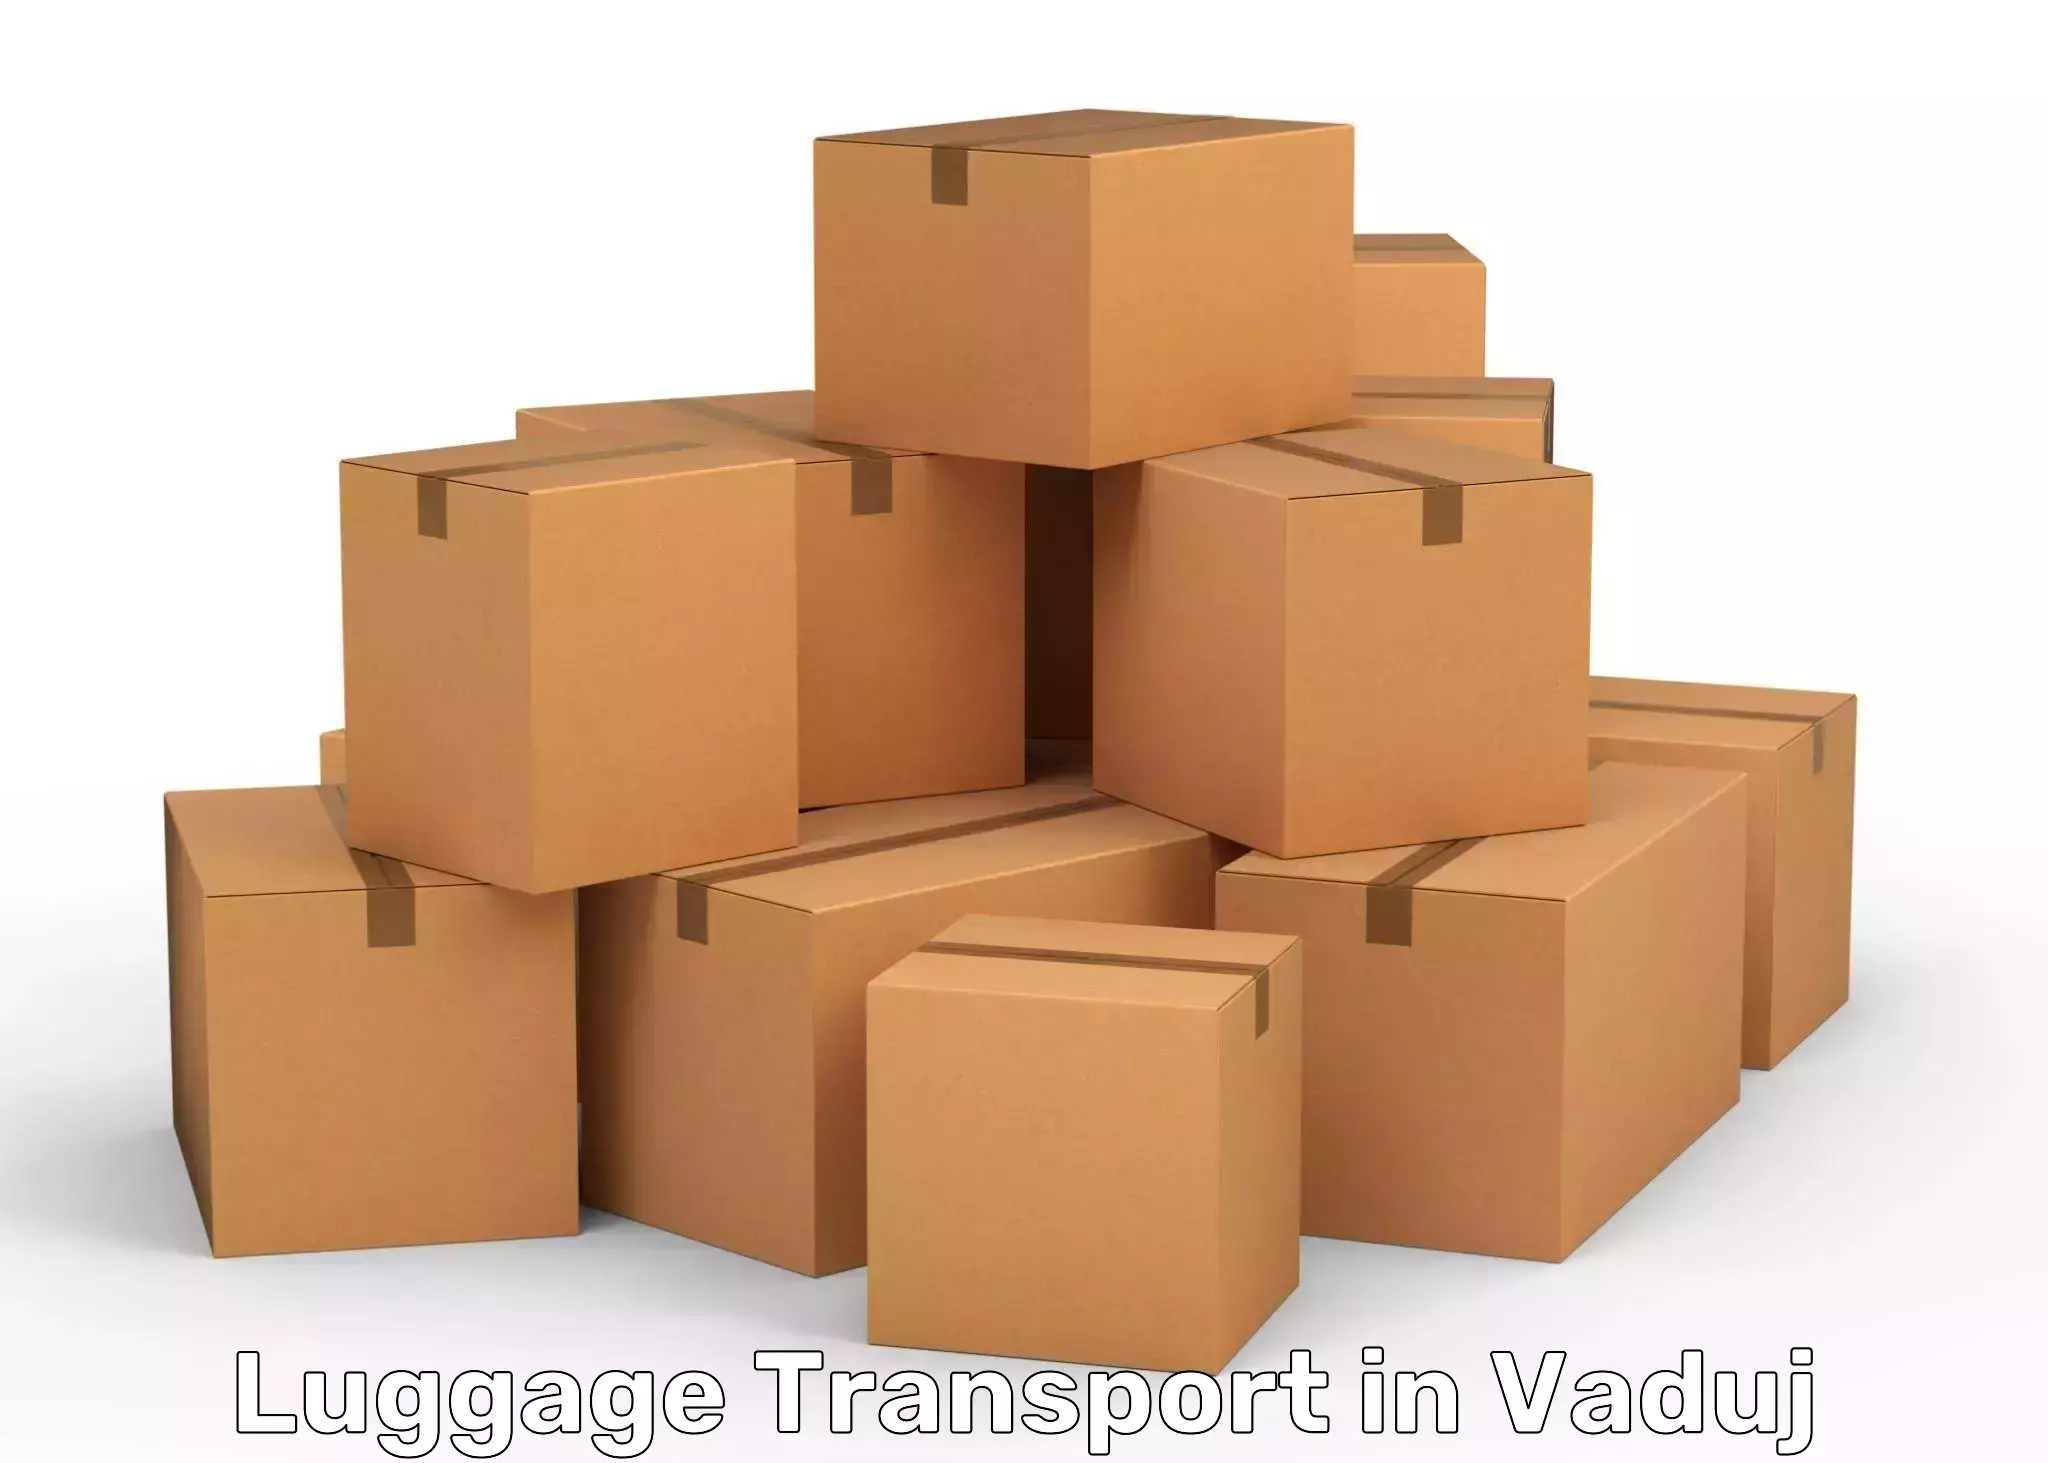 Luggage transport rates in Vaduj